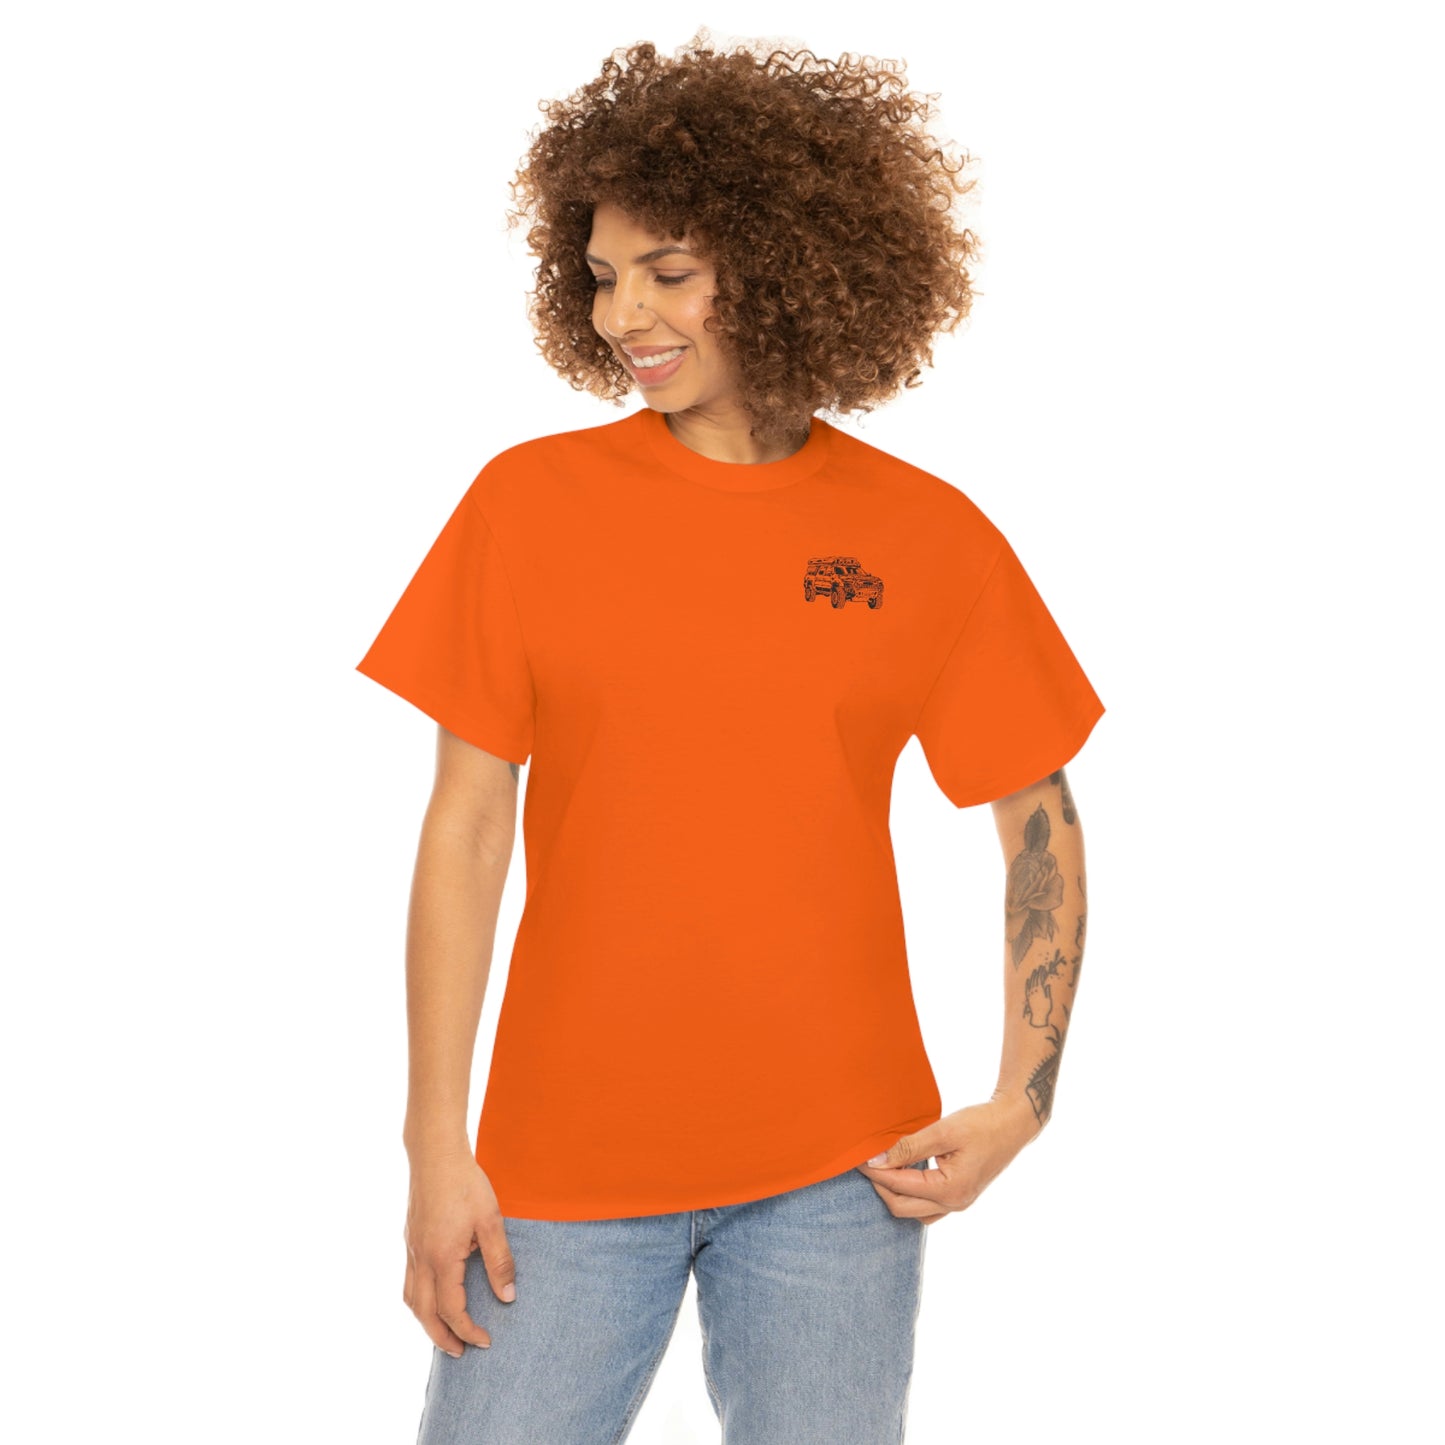 Thrashed Off-Road Overland All Day Shirt